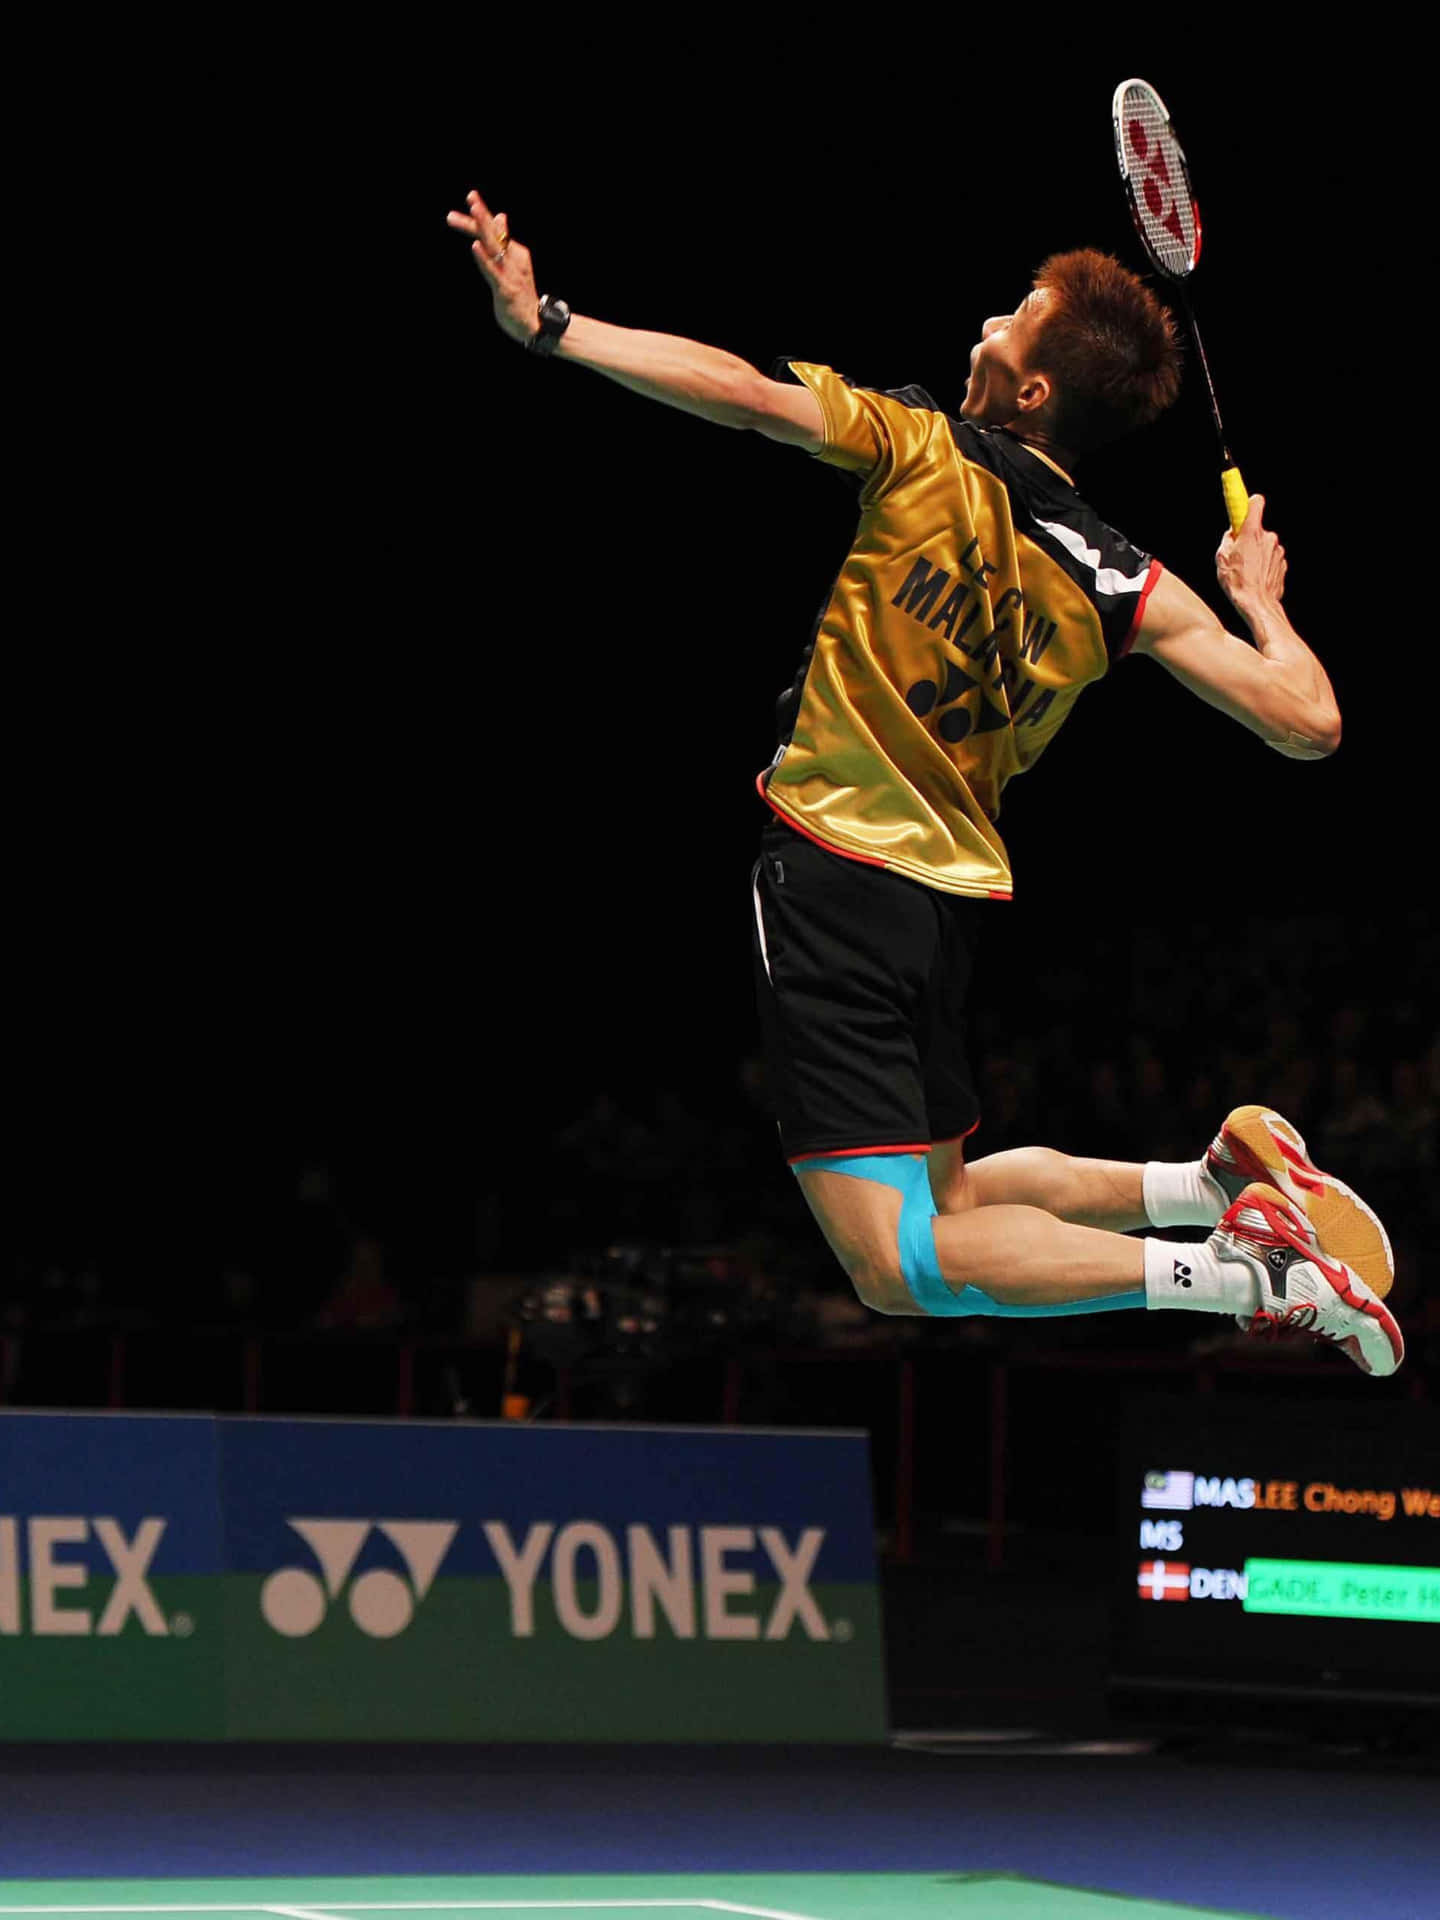 Be the best badminton player with the right gear